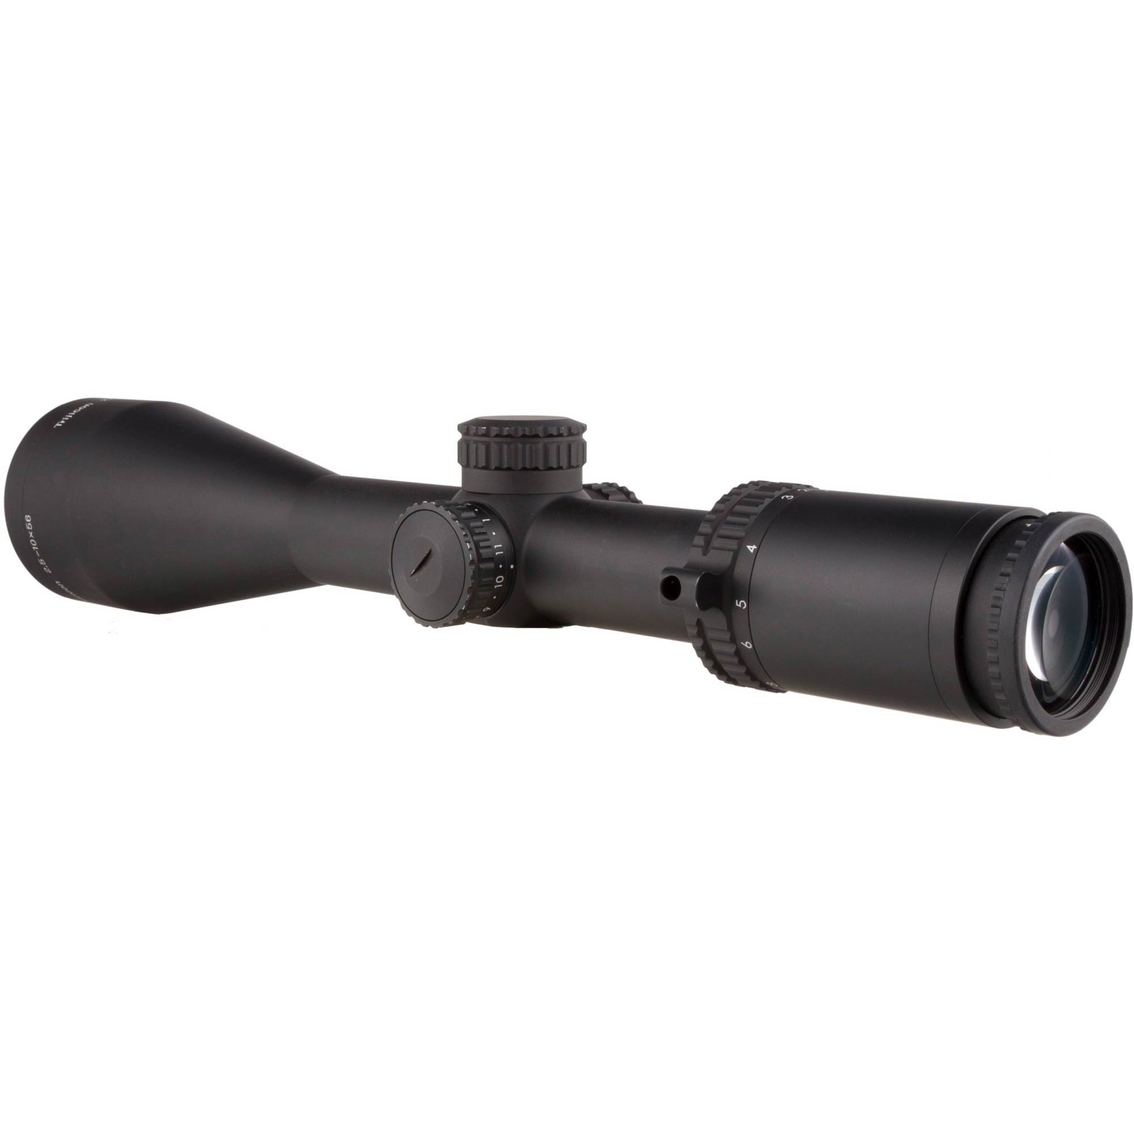 Trijicon AccuPower 2.5-10x56 MOA Red Riflescope - Image 4 of 4